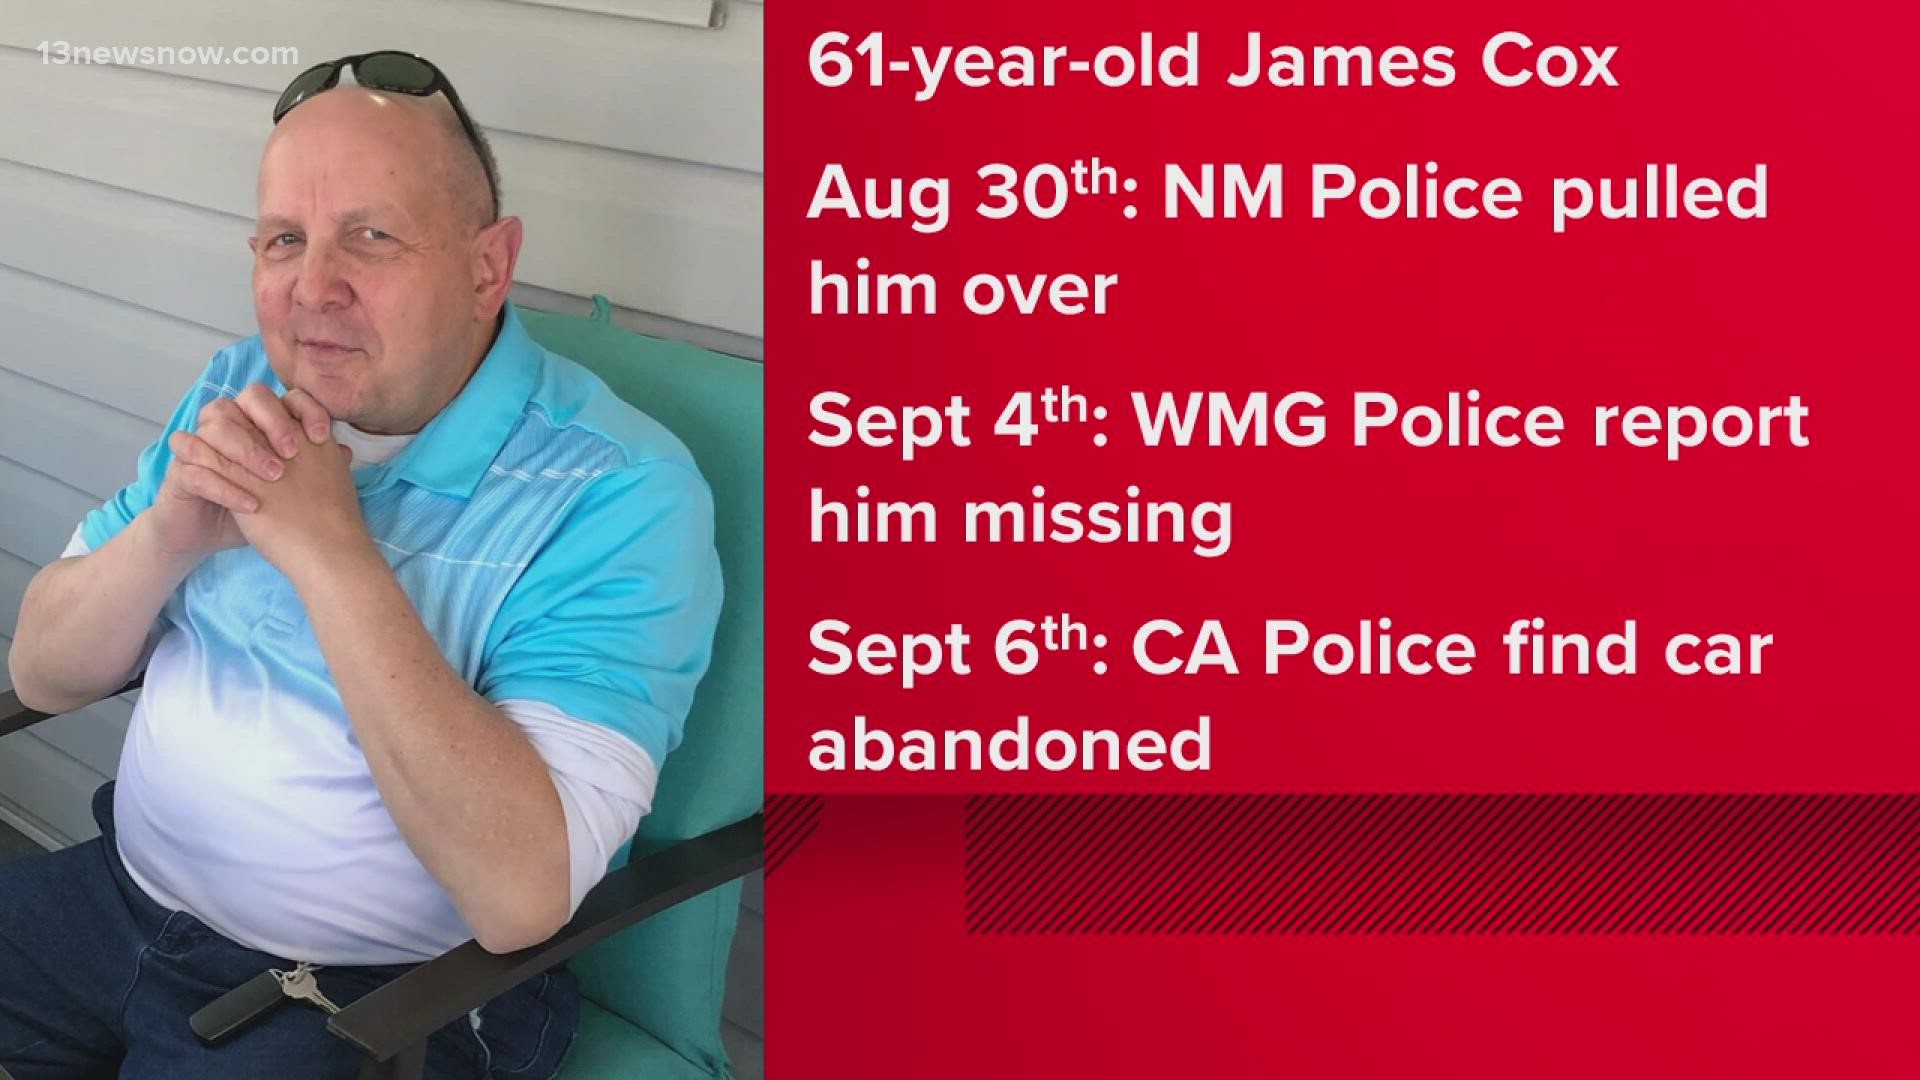 Police in California found 61-year-old James Cox's car abandoned on September 6.